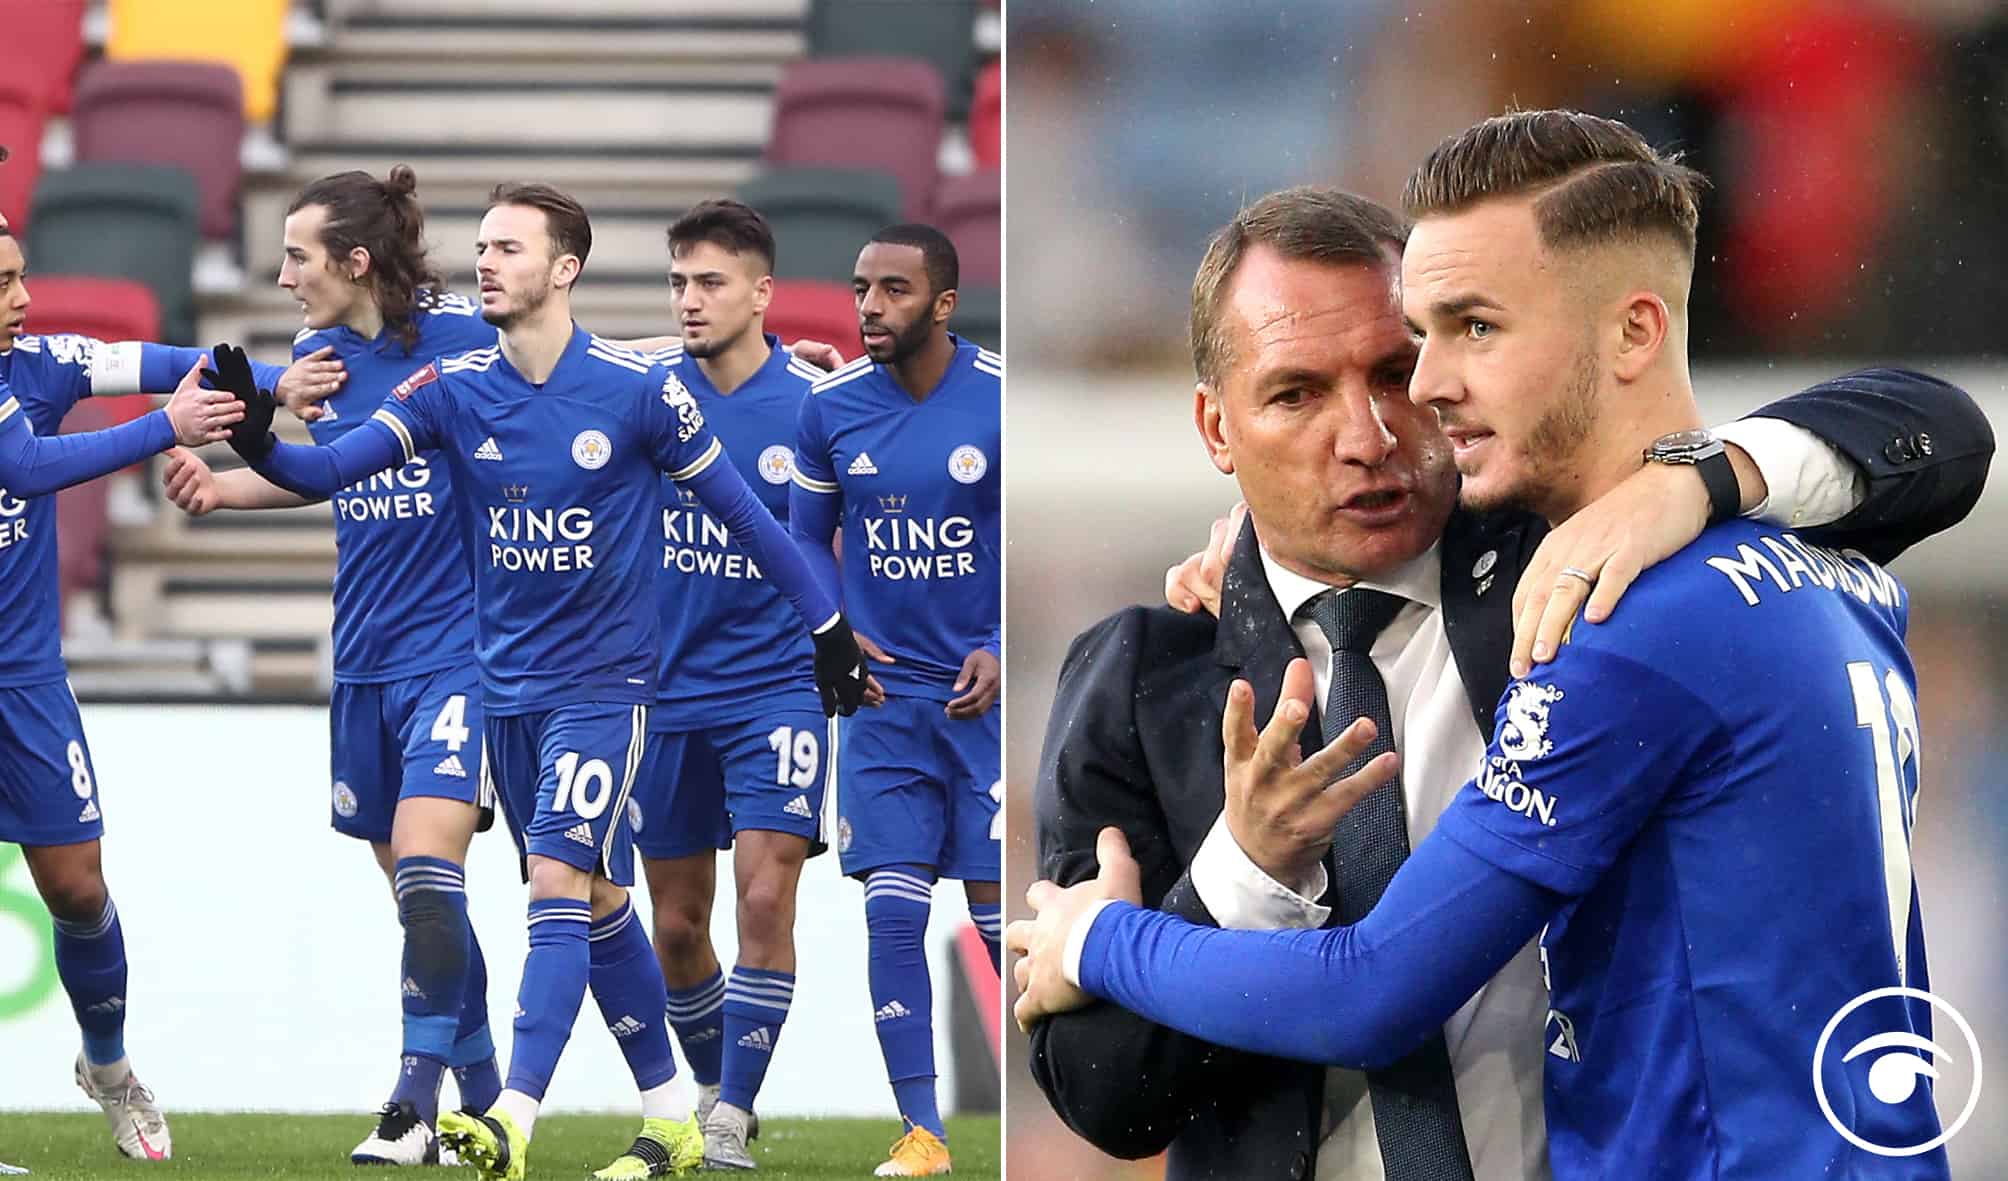 Leicester and Maddison show their winning personality as they face Liverpool